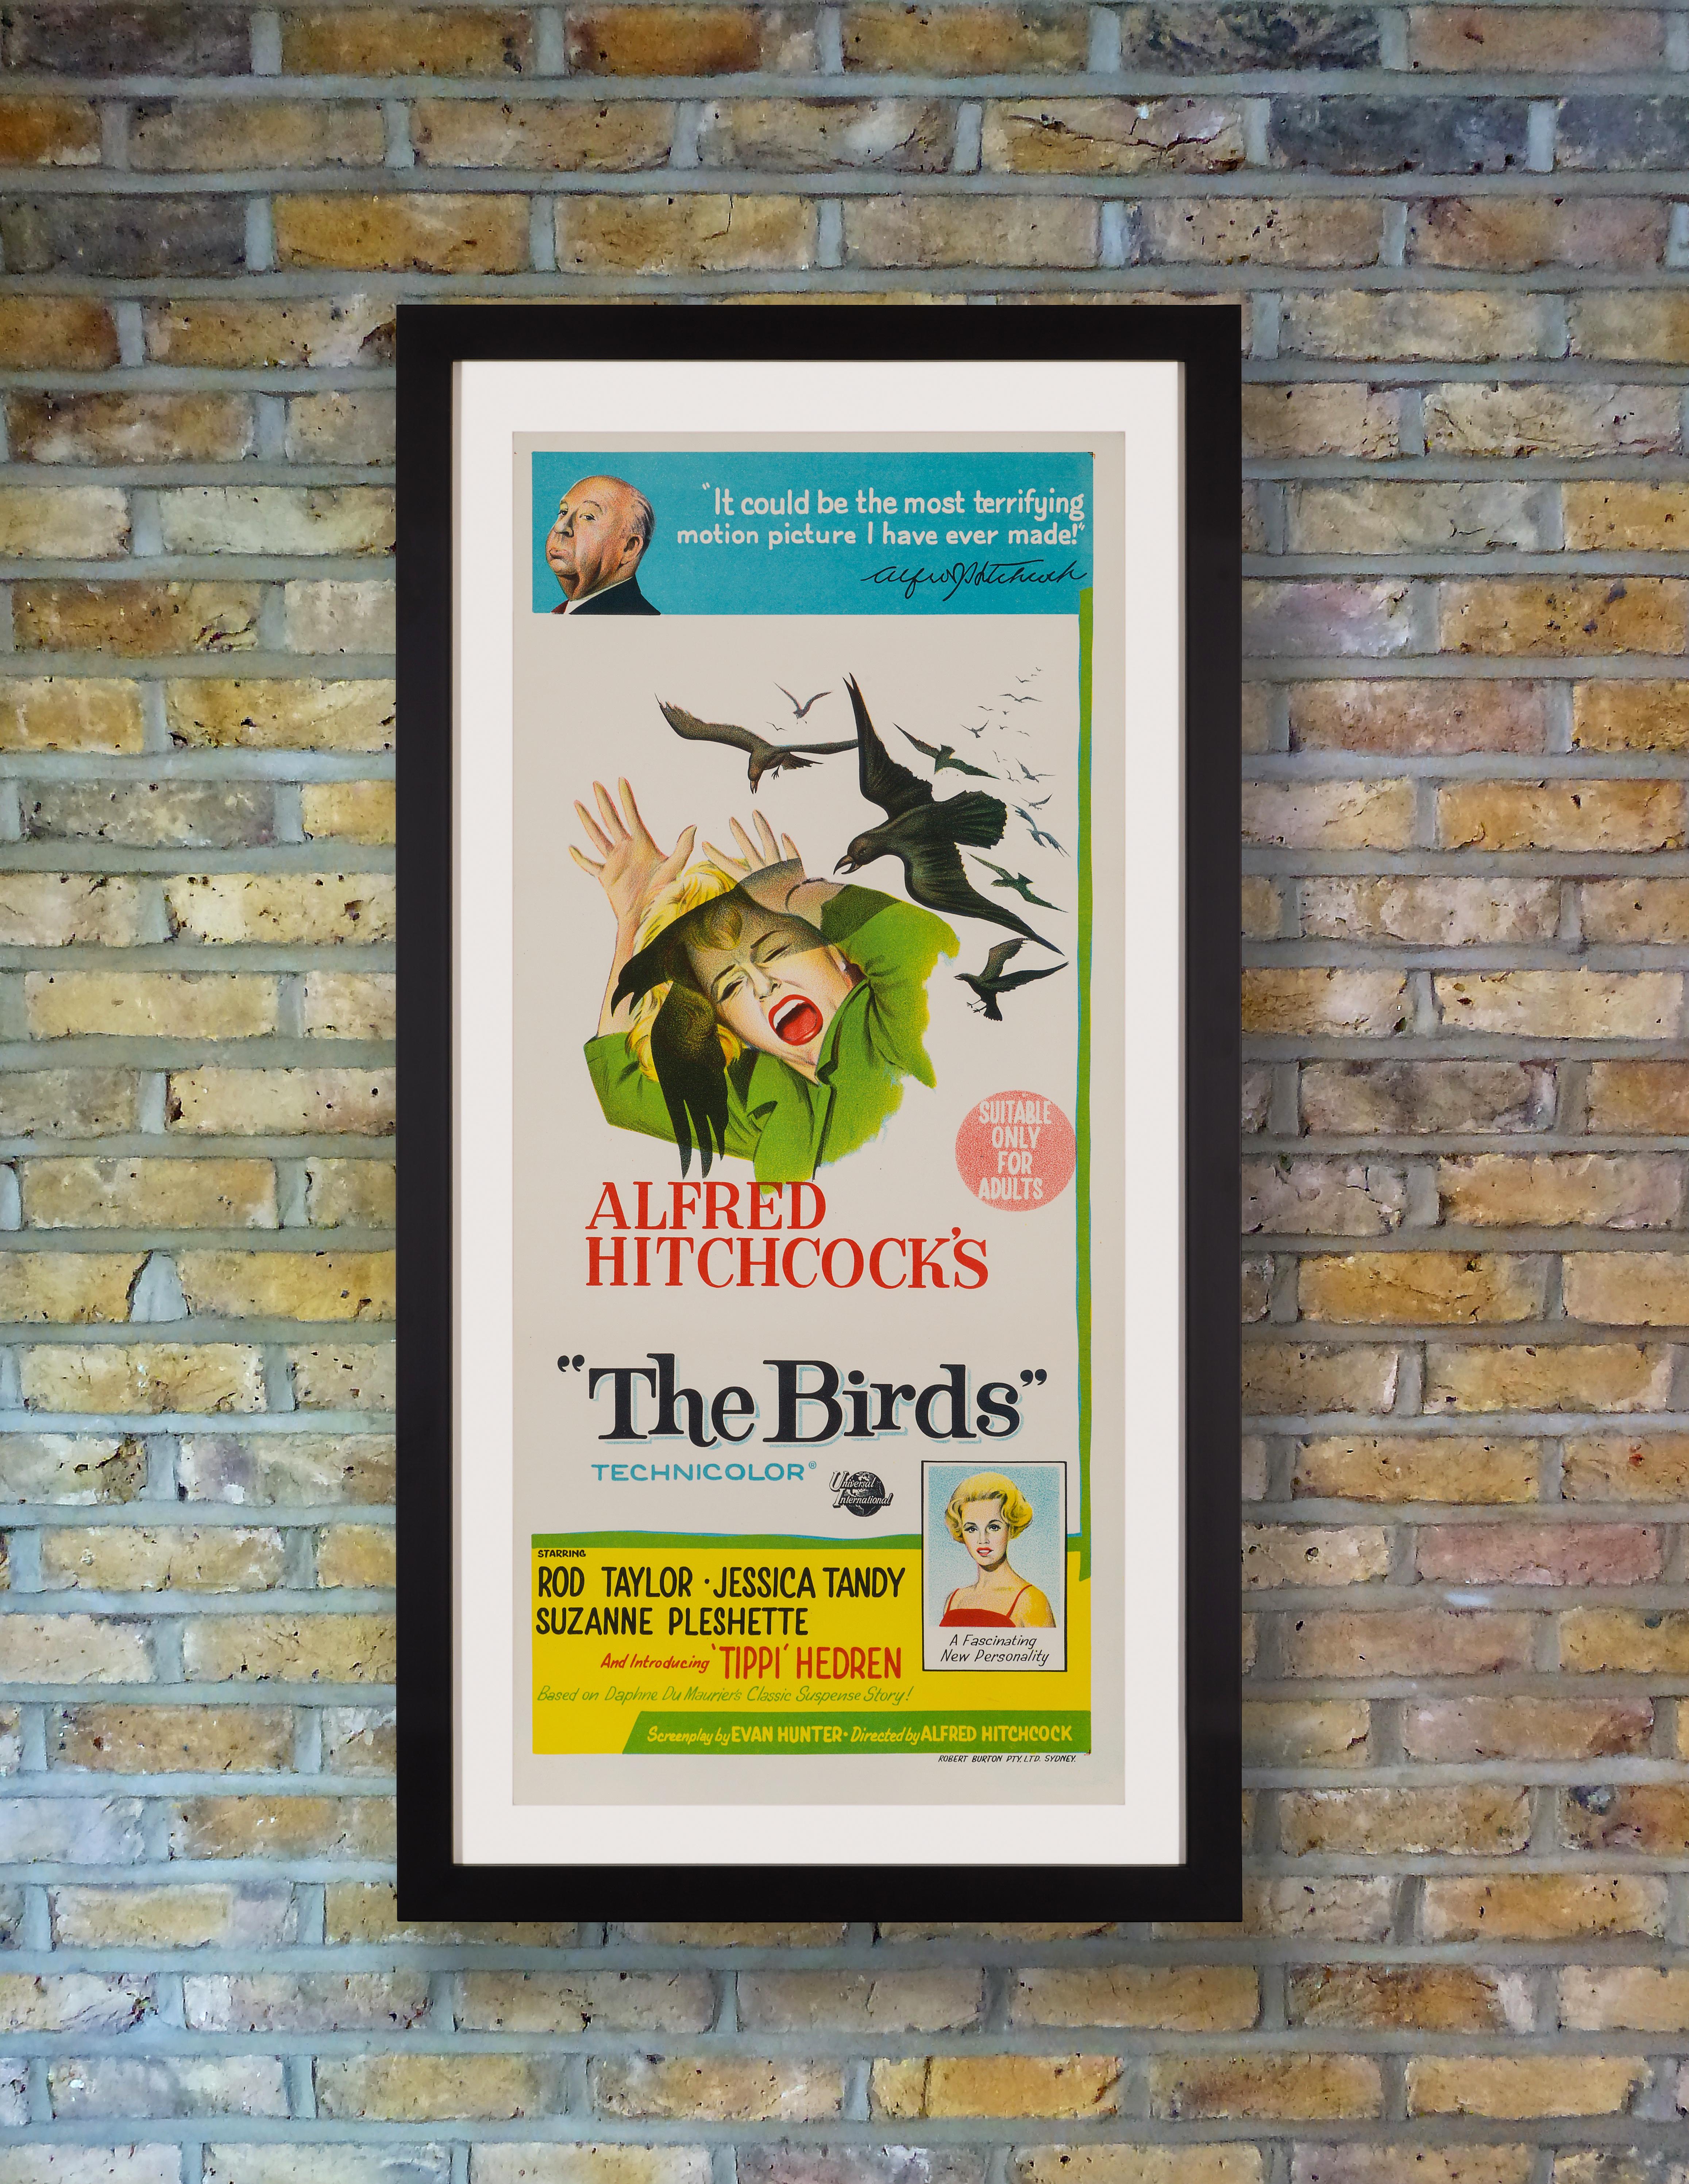 A stunning stone lithography poster for Alfred Hitchcock's psychological masterpiece 'The Birds,' based on Daphne du Maurier's 1952 short story of the same name, starring Tippi Hendren in her debut role. The suspense-filled thriller set in an eerie